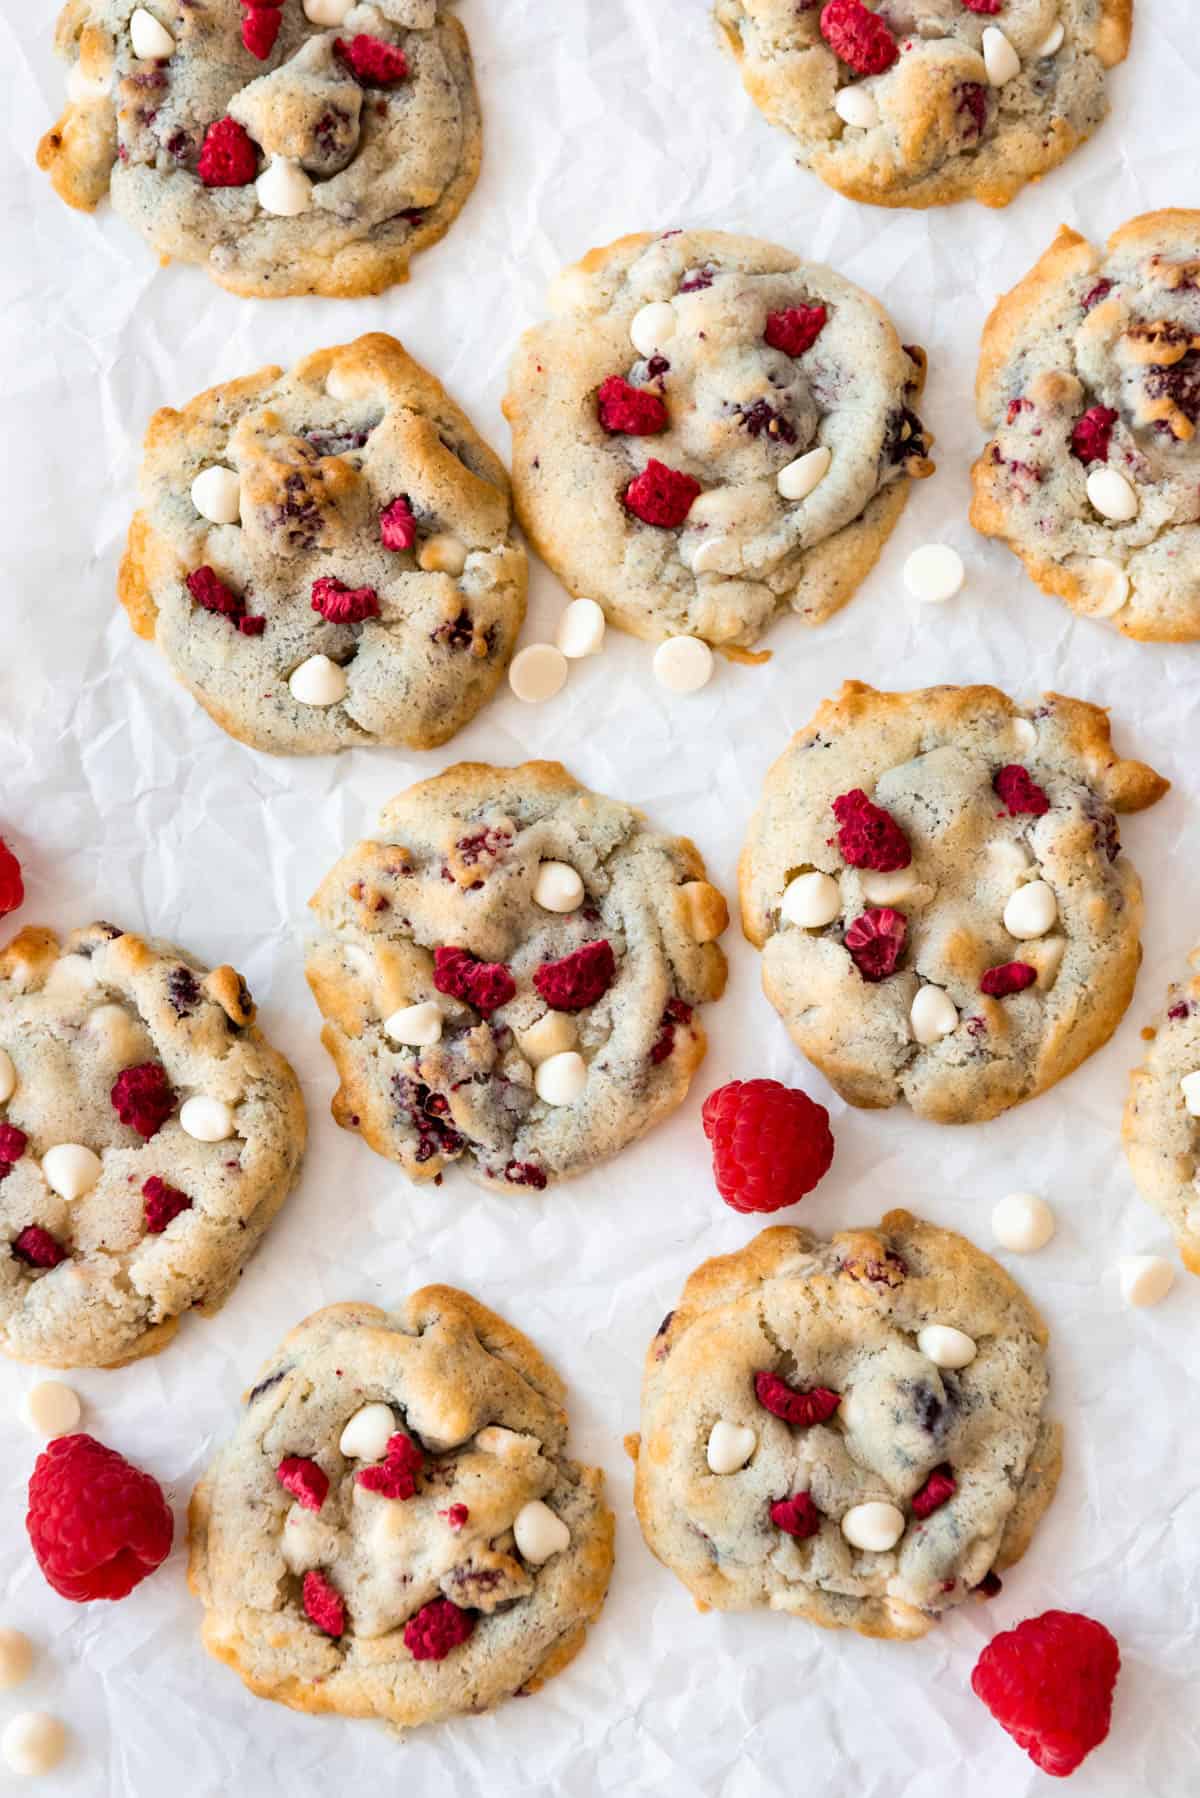 An overhead image of raspberry cheesecake cookies with scattered raspberries and white chocolate chips.